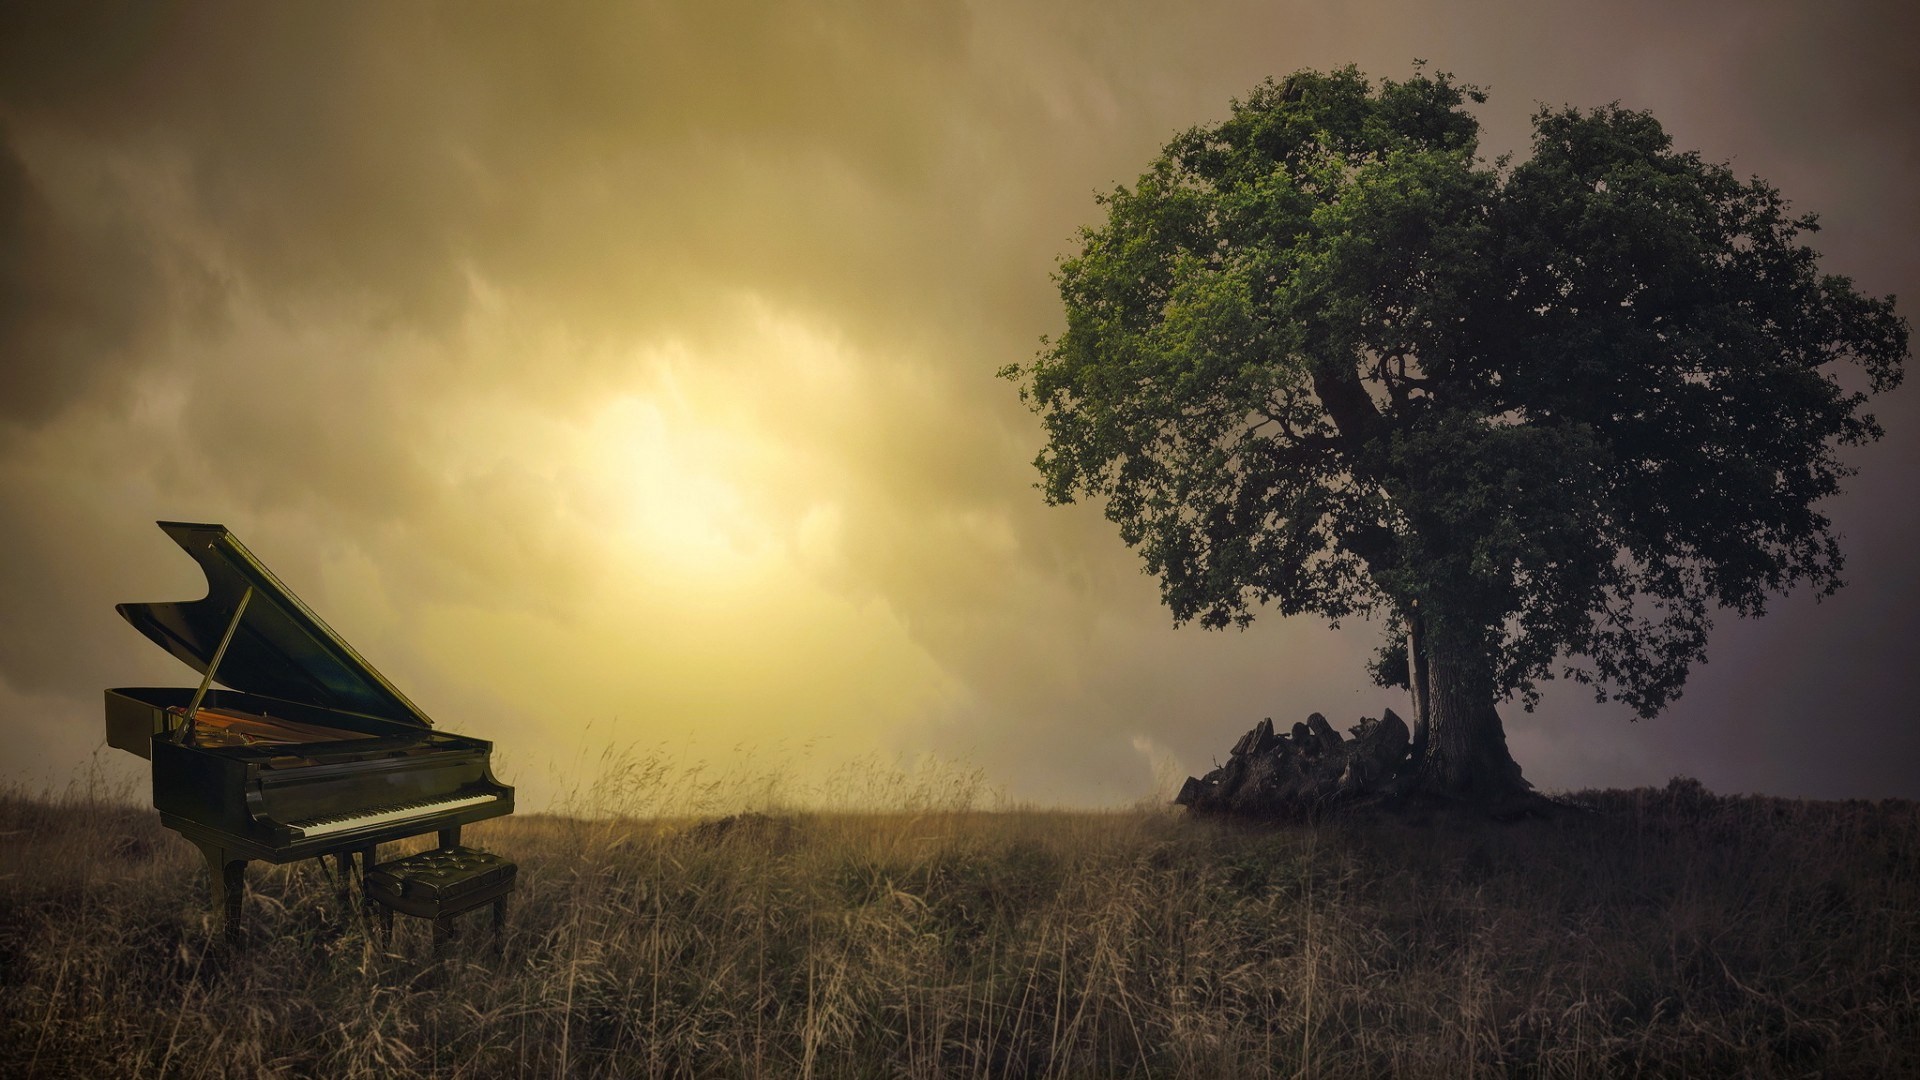 General 1920x1080 nature trees branch leaves photo manipulation piano field Sun clouds grass chair musical instrument digital art